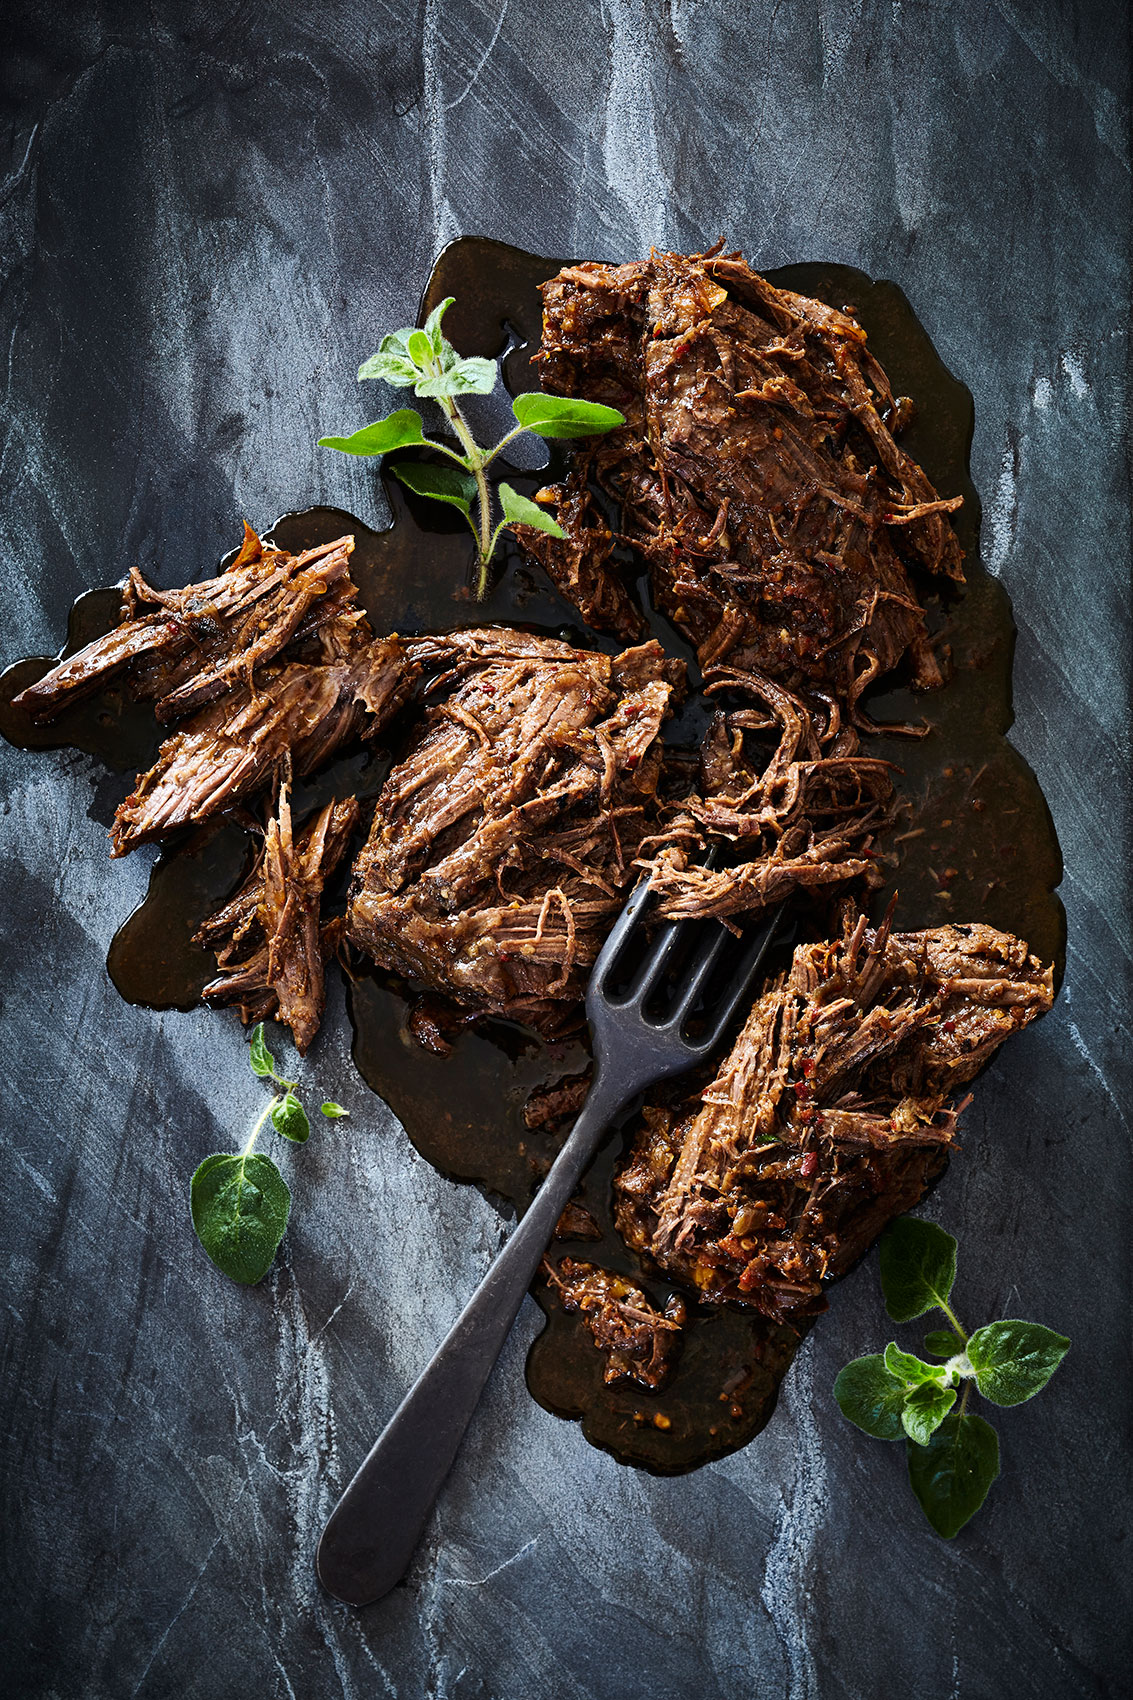 Slow Cooked • Pulled Beef with Black Fork on Textured Stone Bench • Cookbook & Editorial Food Photography